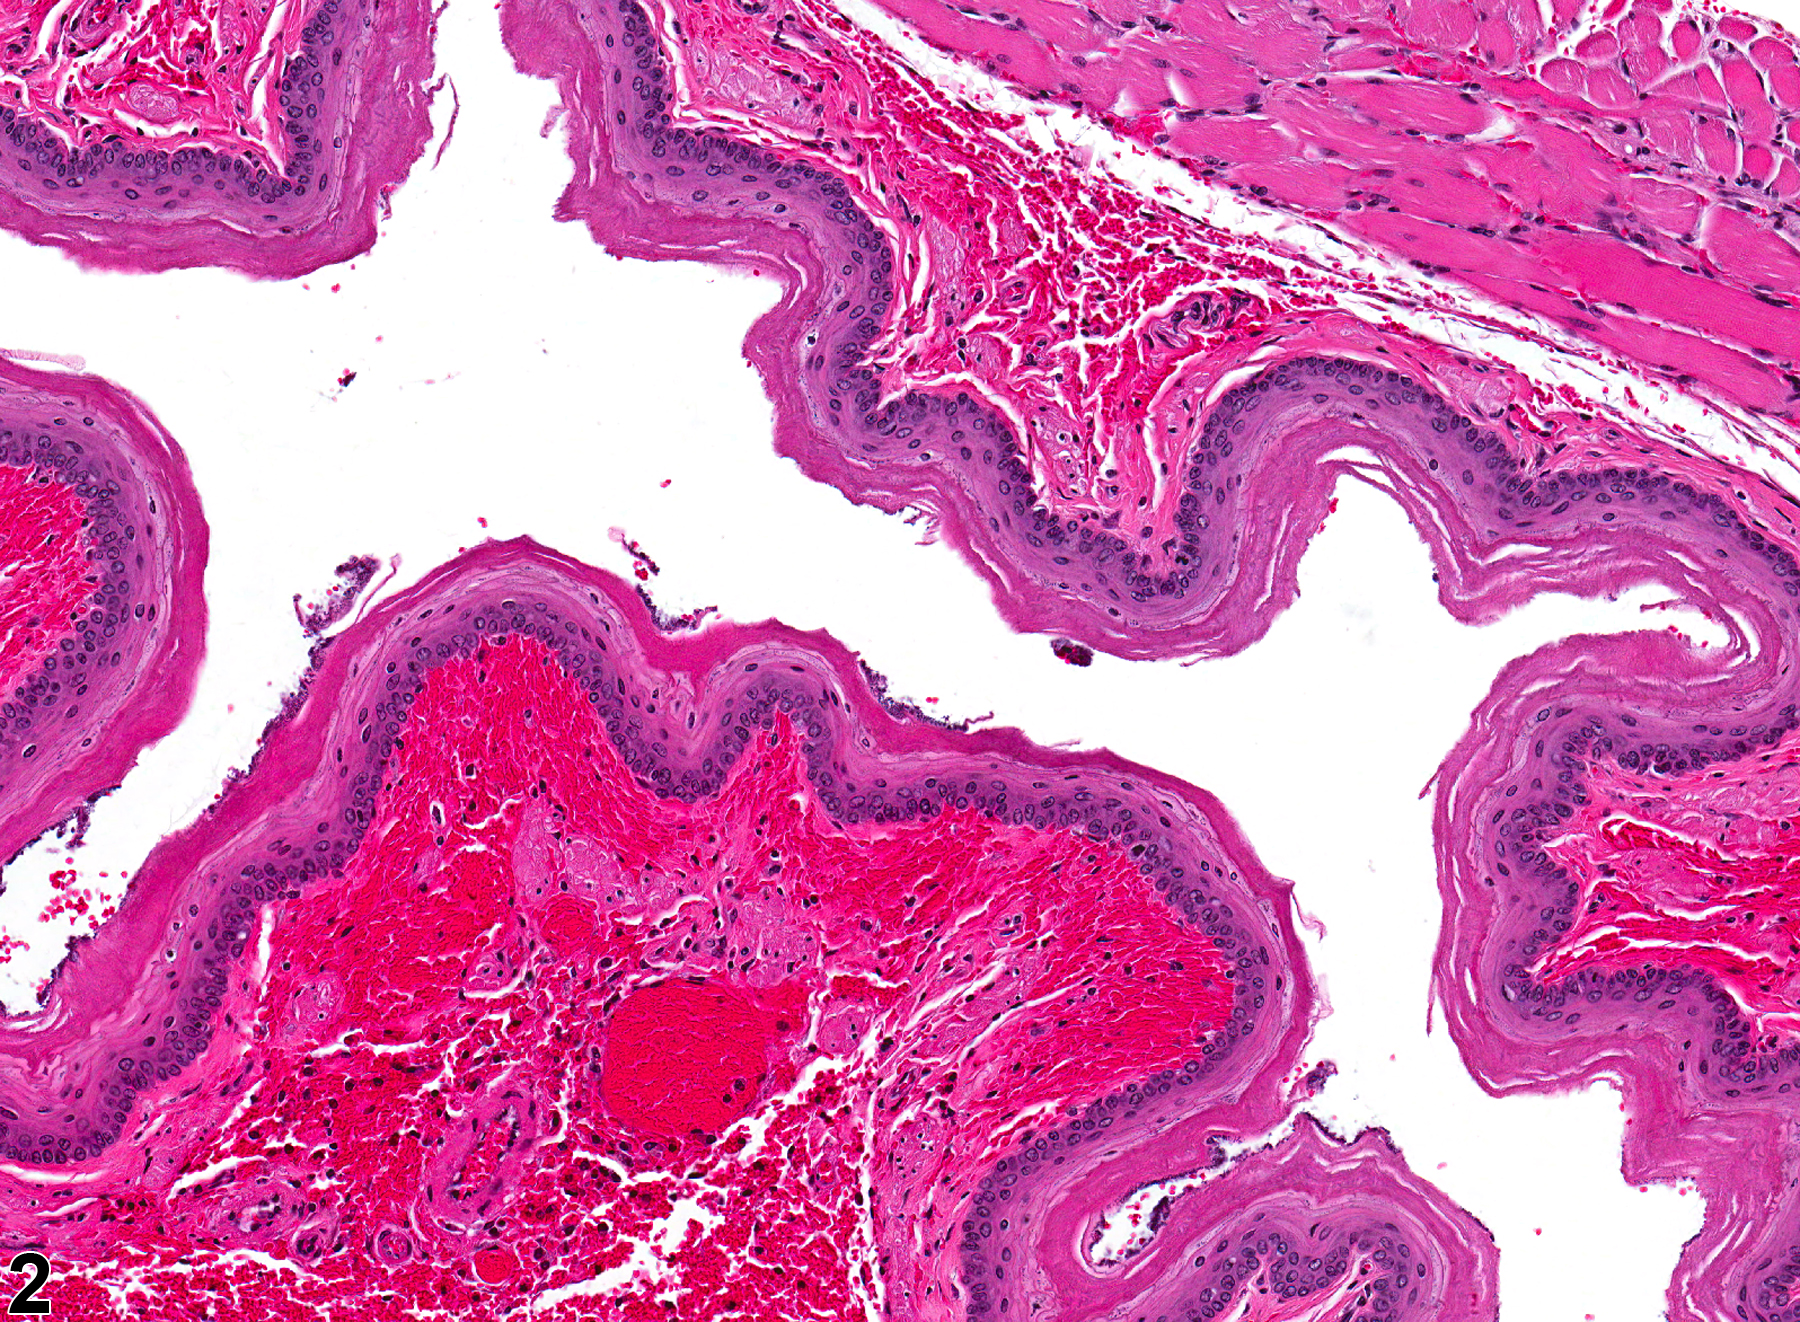 Image of hemorrhage in the esophagus from a male F344/N rat in a chronic study